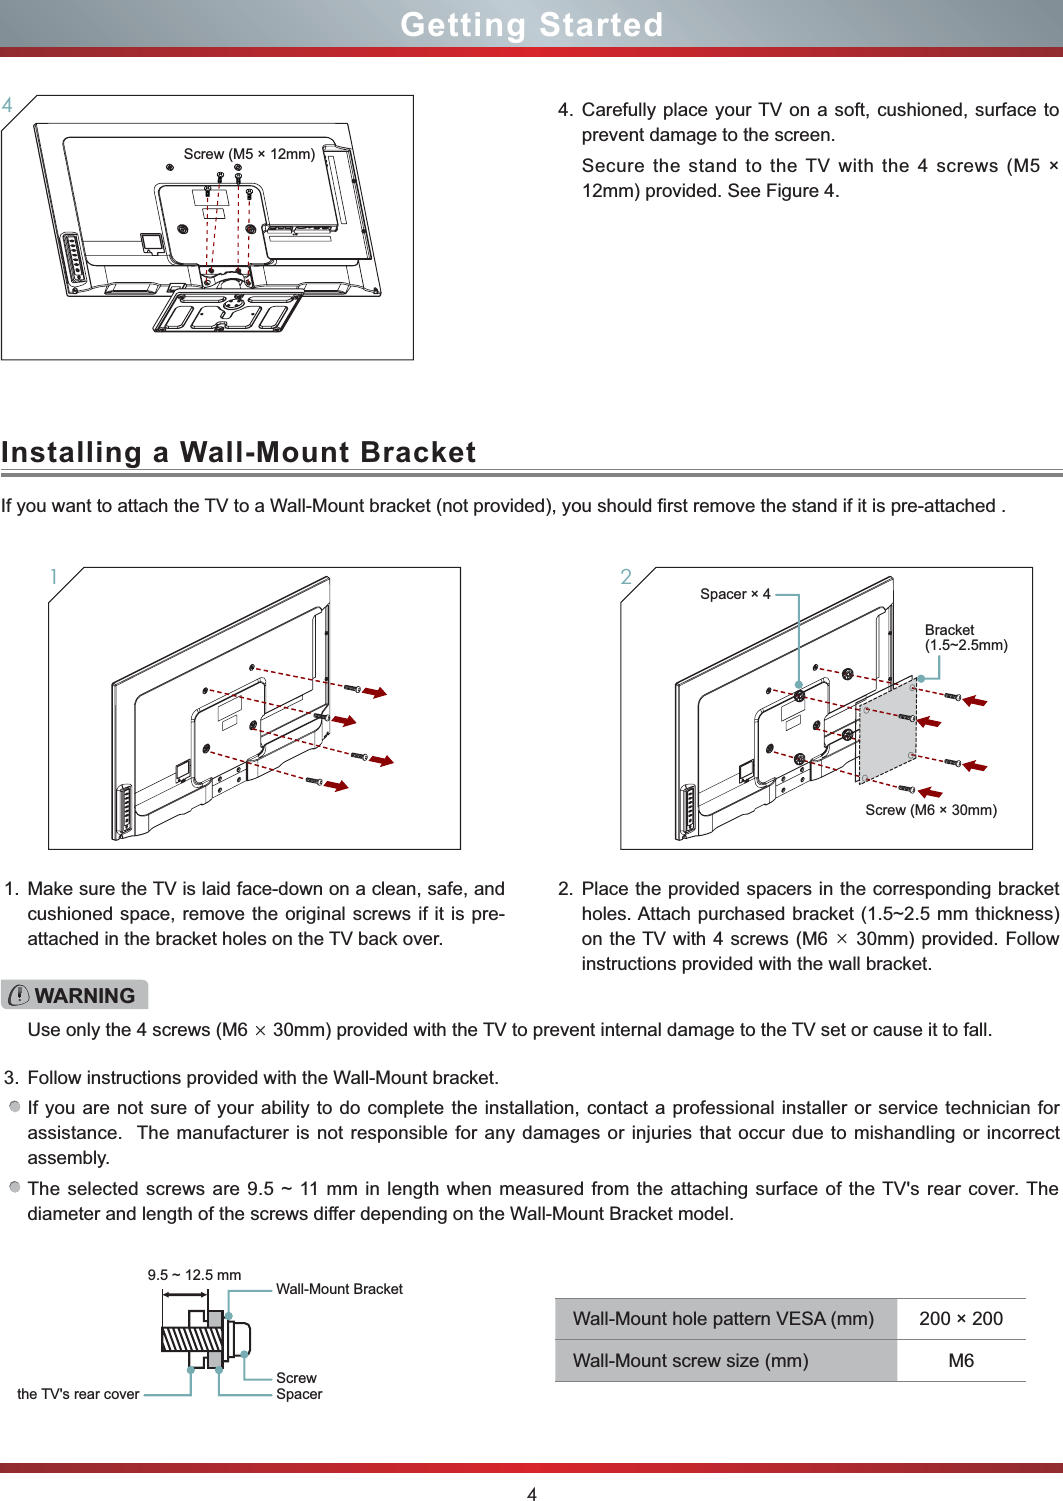 4Getting StartedInstalling a Wall-Mount Bracket4. Carefully place your TV on a soft, cushioned, surface to prevent damage to the screen.Secure the stand to the TV with the 4 screws (M5 × 12mm) provided. See Figure 4.4Screw (M5 × 12mm)If you want to attach the TV to a Wall-Mount bracket (not provided), you should first remove the stand if it is pre-attached .1. Make sure the TV is laid face-down on a clean, safe, and cushioned space, remove the original screws if it is pre-attached in the bracket holes on the TV back over.3. Follow instructions provided with the Wall-Mount bracket.If you are not sure of your ability to do complete the installation, contact a professional installer or service technician for assistance.  The manufacturer is not responsible for any damages or injuries that occur due to mishandling or incorrect assembly.The selected screws are 9.5 ~ 11 mm in length when measured from the attaching surface of the TV&apos;s rear cover. The diameter and length of the screws differ depending on the Wall-Mount Bracket model.2. Place the provided spacers in the corresponding bracket  holes. Attach purchased bracket (1.5~2.5 mm thickness) on the TV with 4 screws (M6 h 30mm) provided. Follow instructions provided with the wall bracket.1WARNINGUse only the 4 screws (M6 h 30mm) provided with the TV to prevent internal damage to the TV set or cause it to fall.Wall-Mount Bracket9.5 ~ 12.5 mmScrewSpacerthe TV&apos;s rear coverWall-Mount hole pattern VESA (mm) 200 × 200Wall-Mount screw size (mm) M6Screw (M6 × 30mm)2Spacer × 4Bracket(1.5~2.5mm)